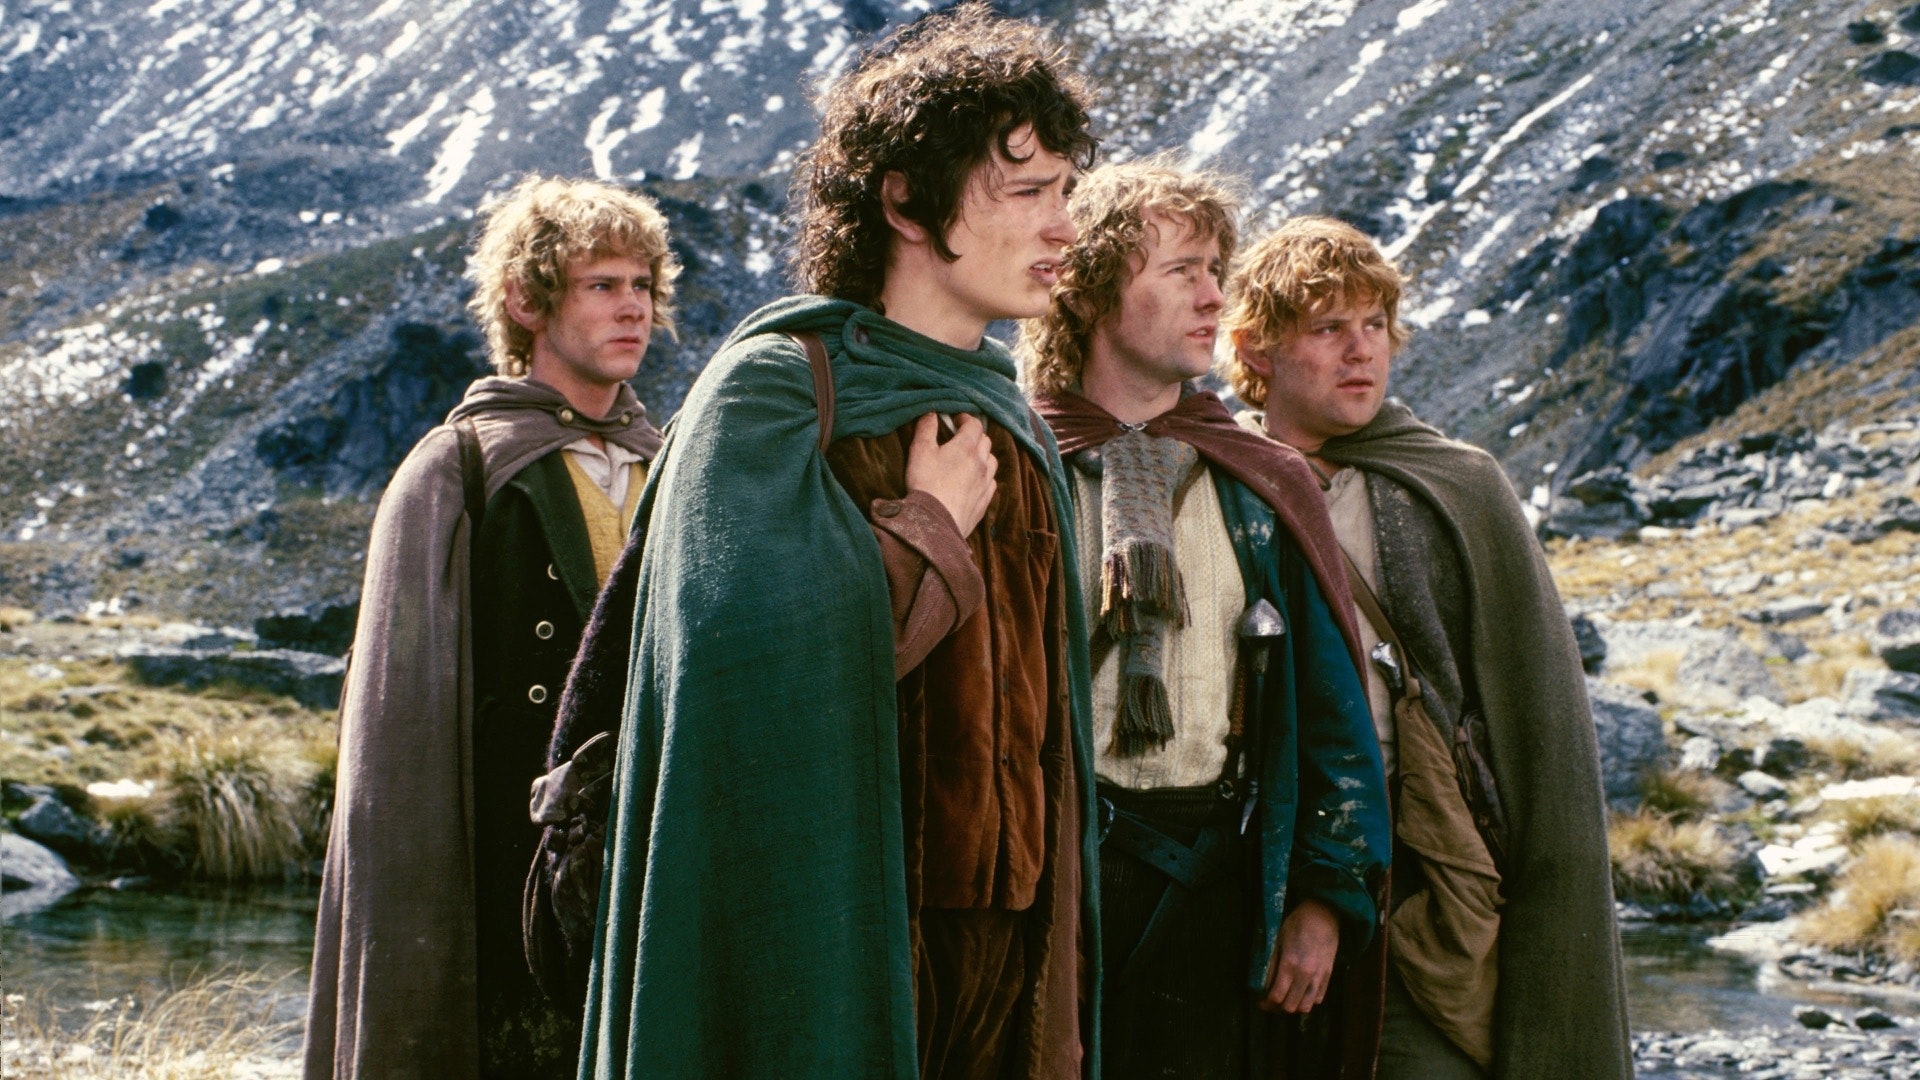 LORD OF THE RINGS 1: The Fellowship of the Ring